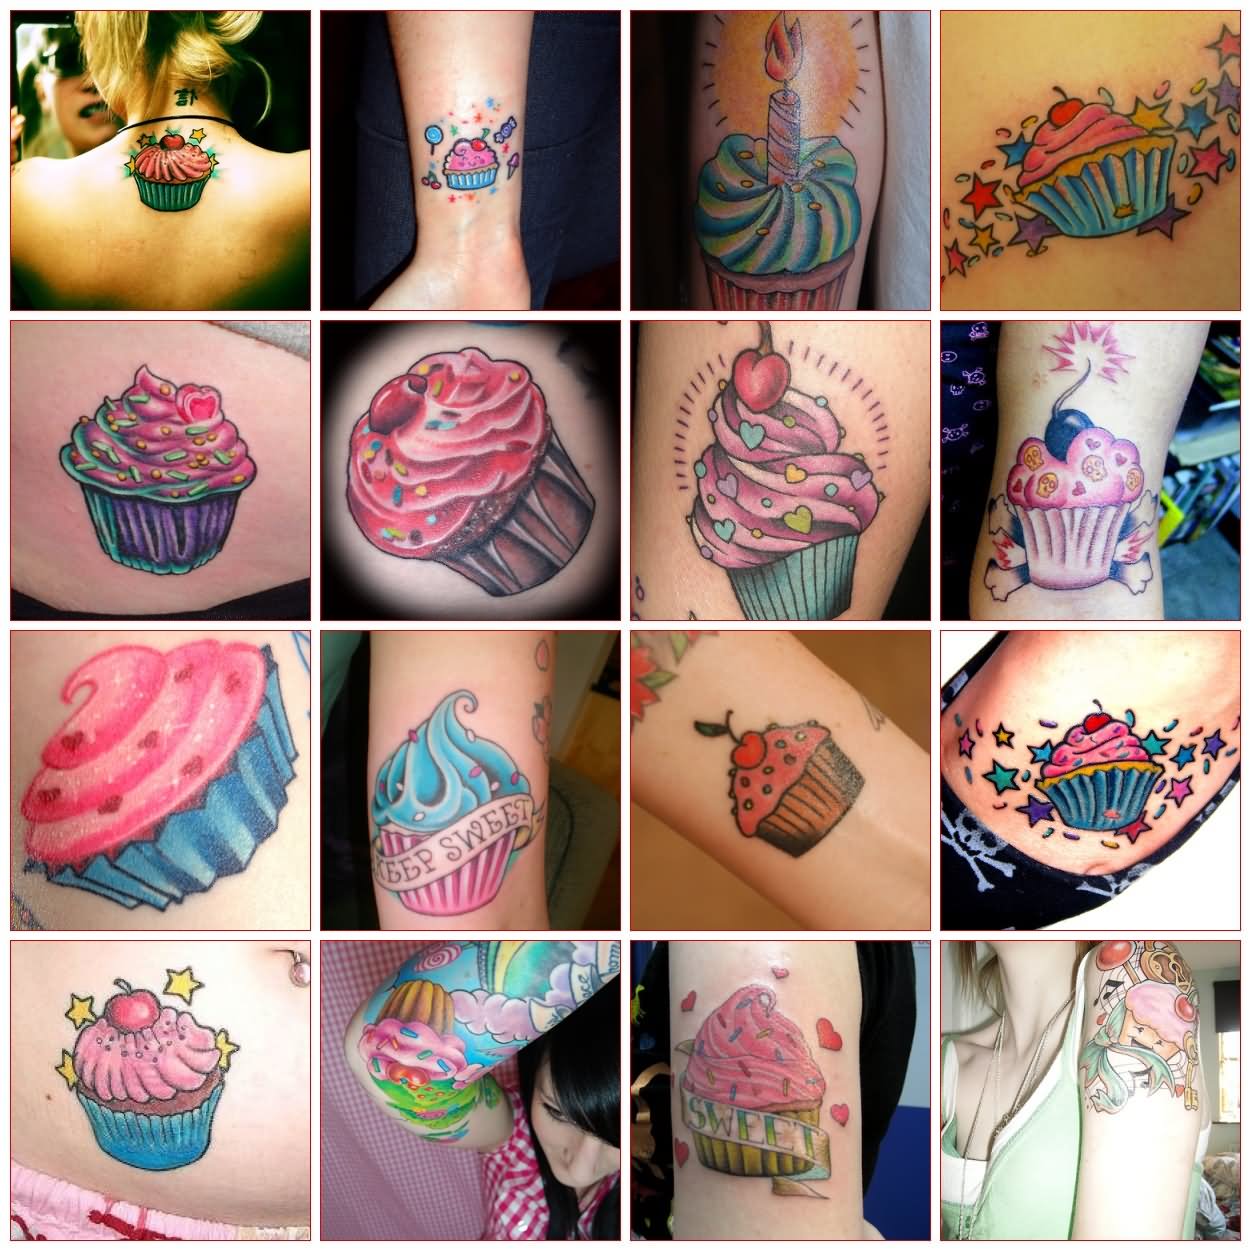 20 Cupcake Tattoo Images And Designs For Girls